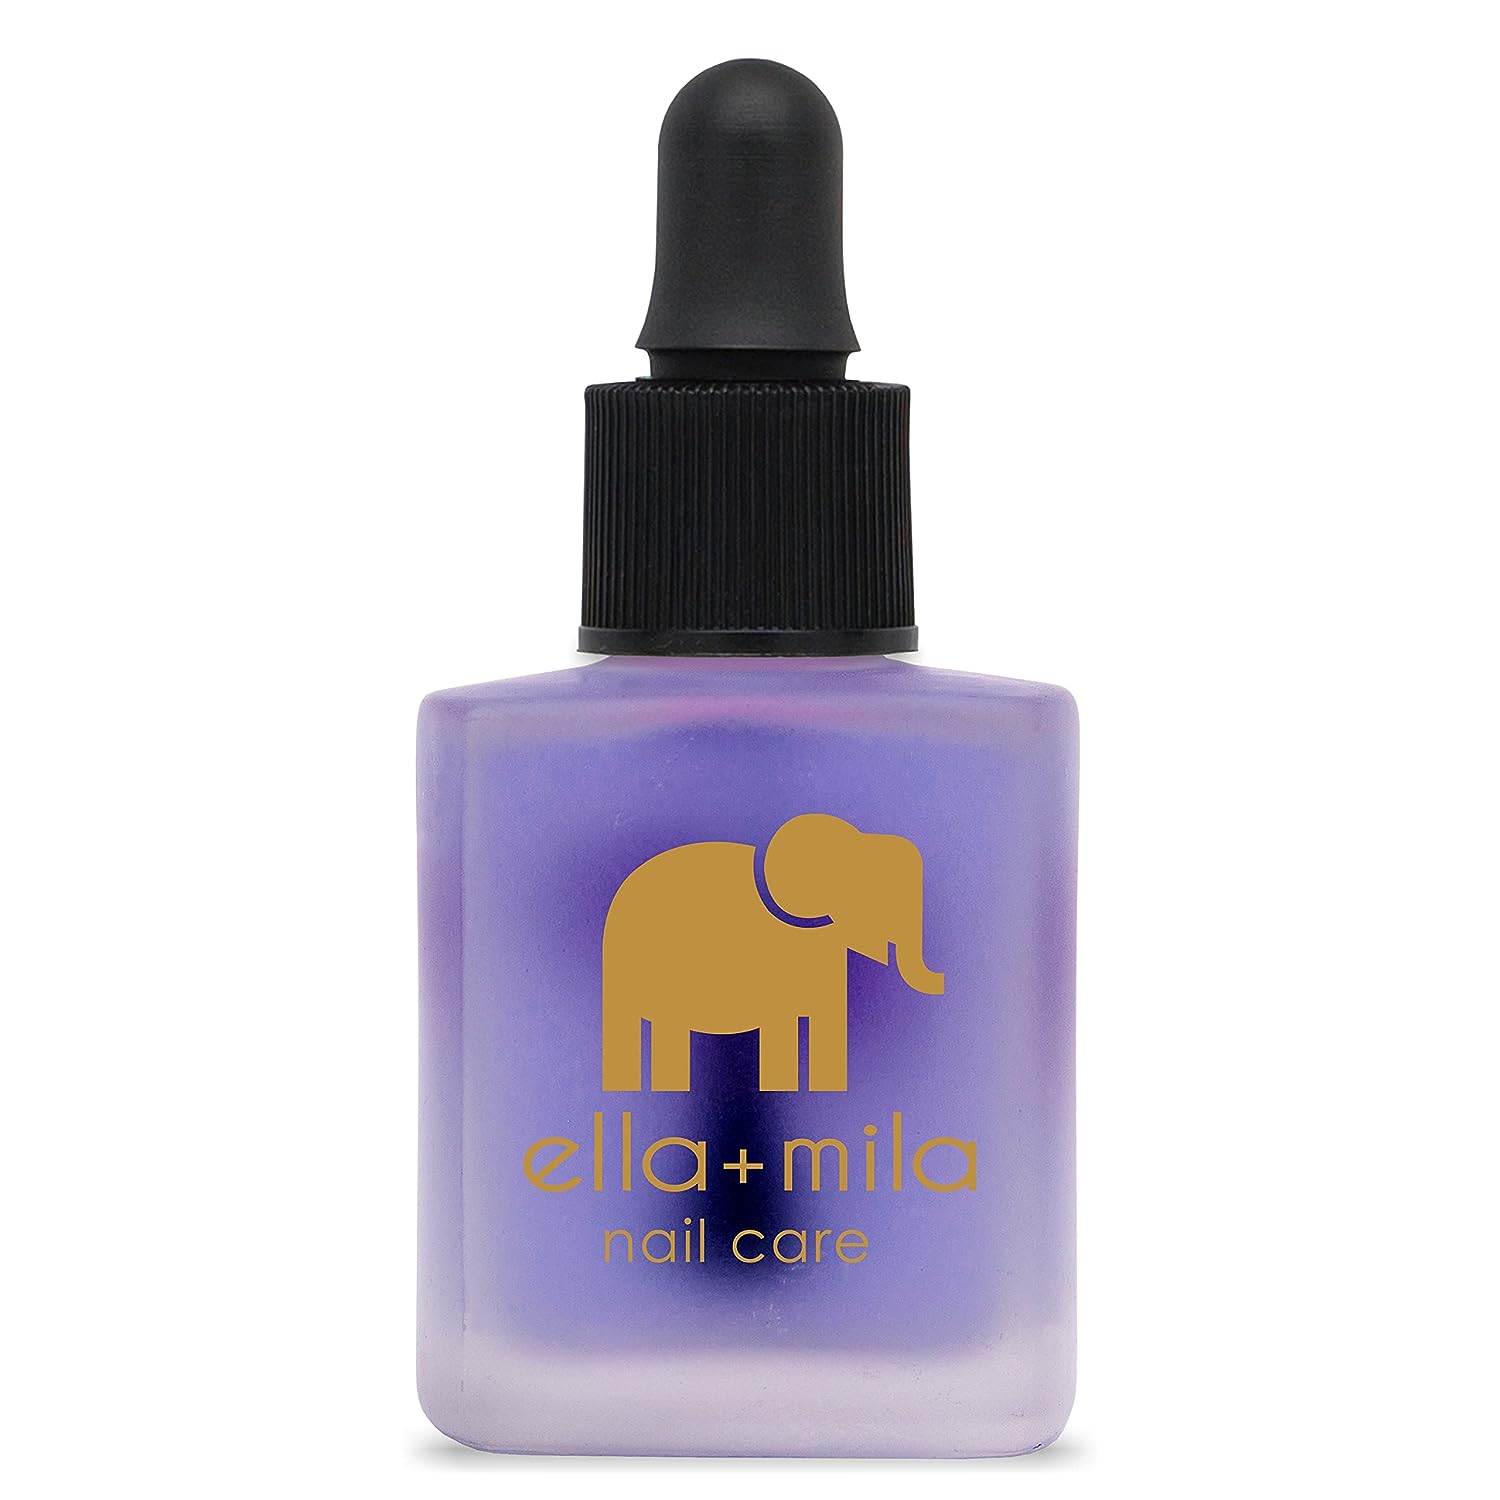 Ella+mila nail care, cuticle oil with almond oil - oil me up, Size: 0.45 Fl Oz (Pack of 1), Other